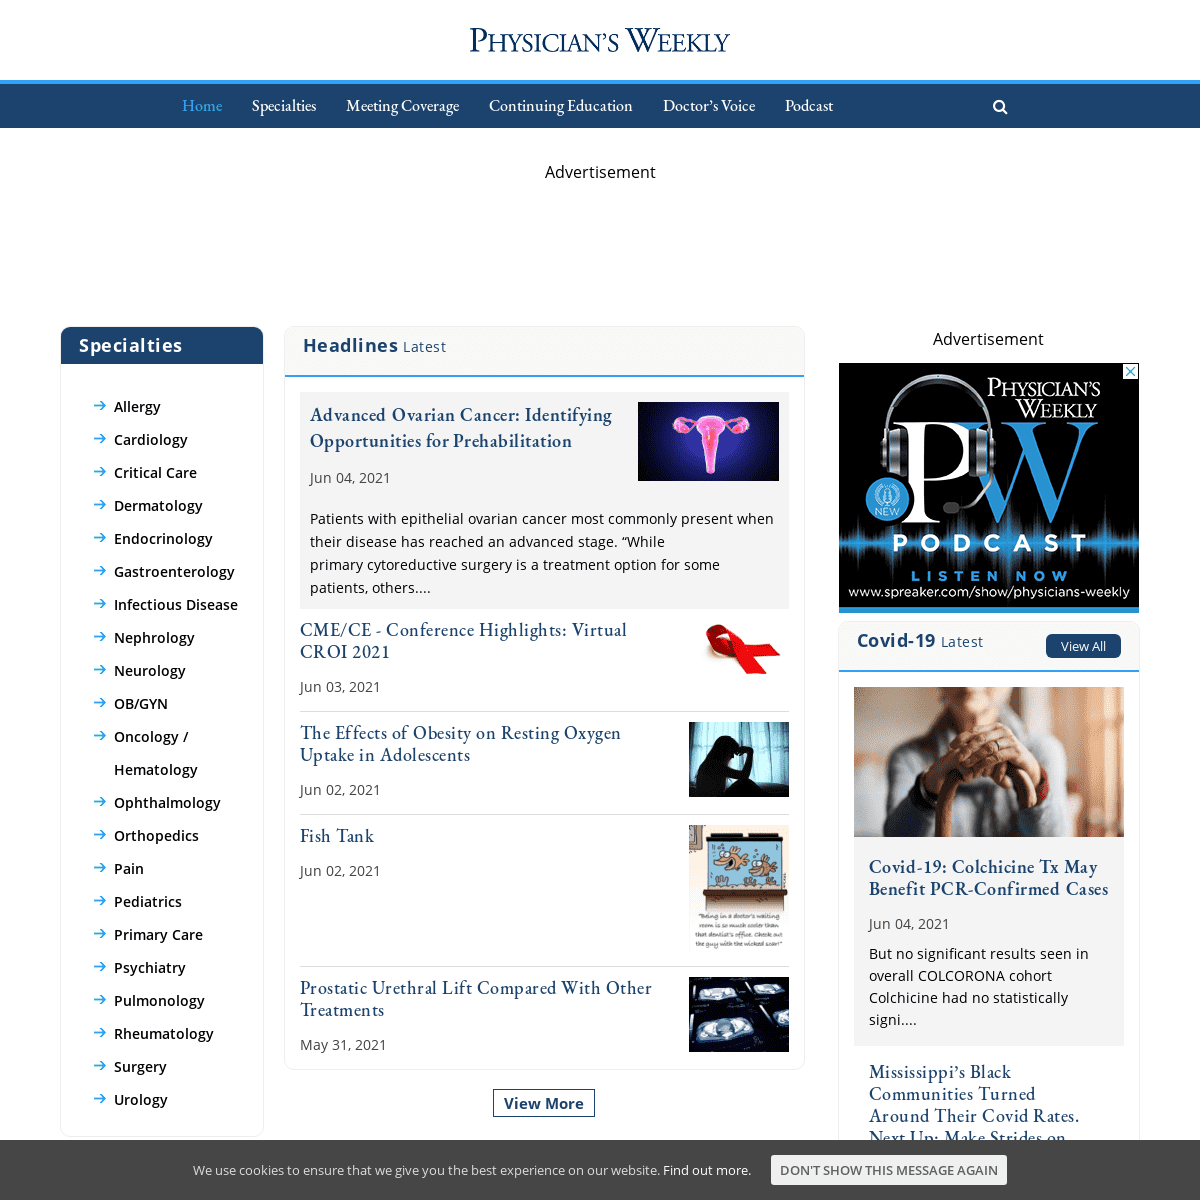 A complete backup of https://physiciansweekly.com